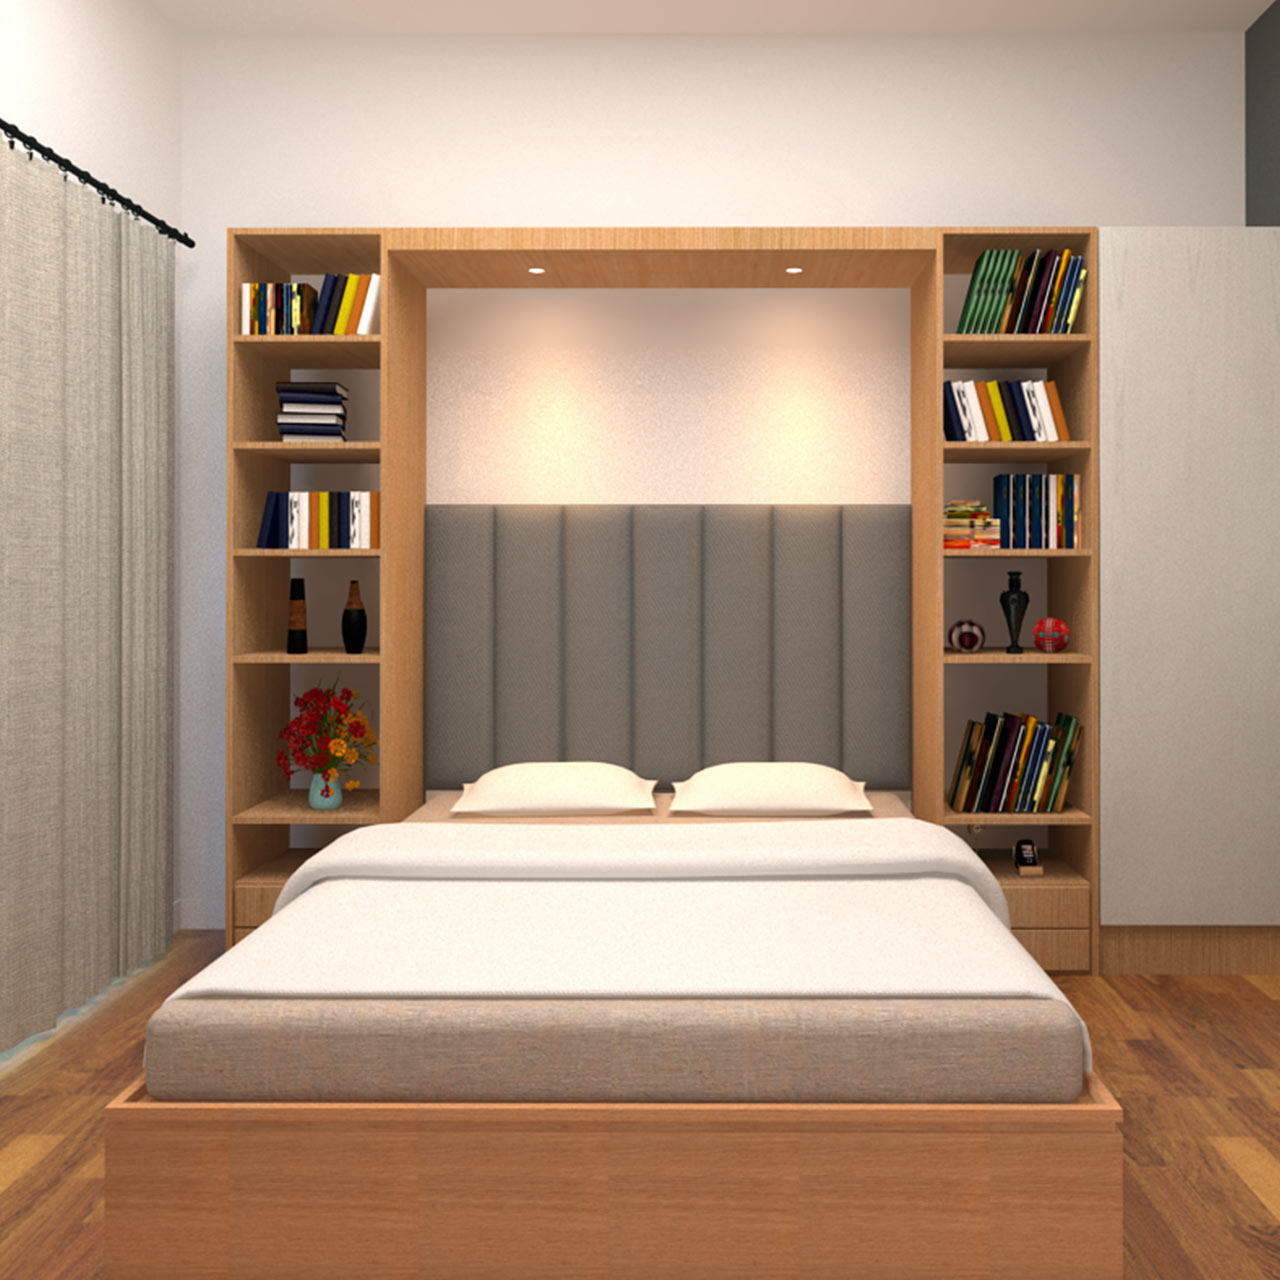 Things to consider before interior designing your bedroom accessories, checklist of bedroom design